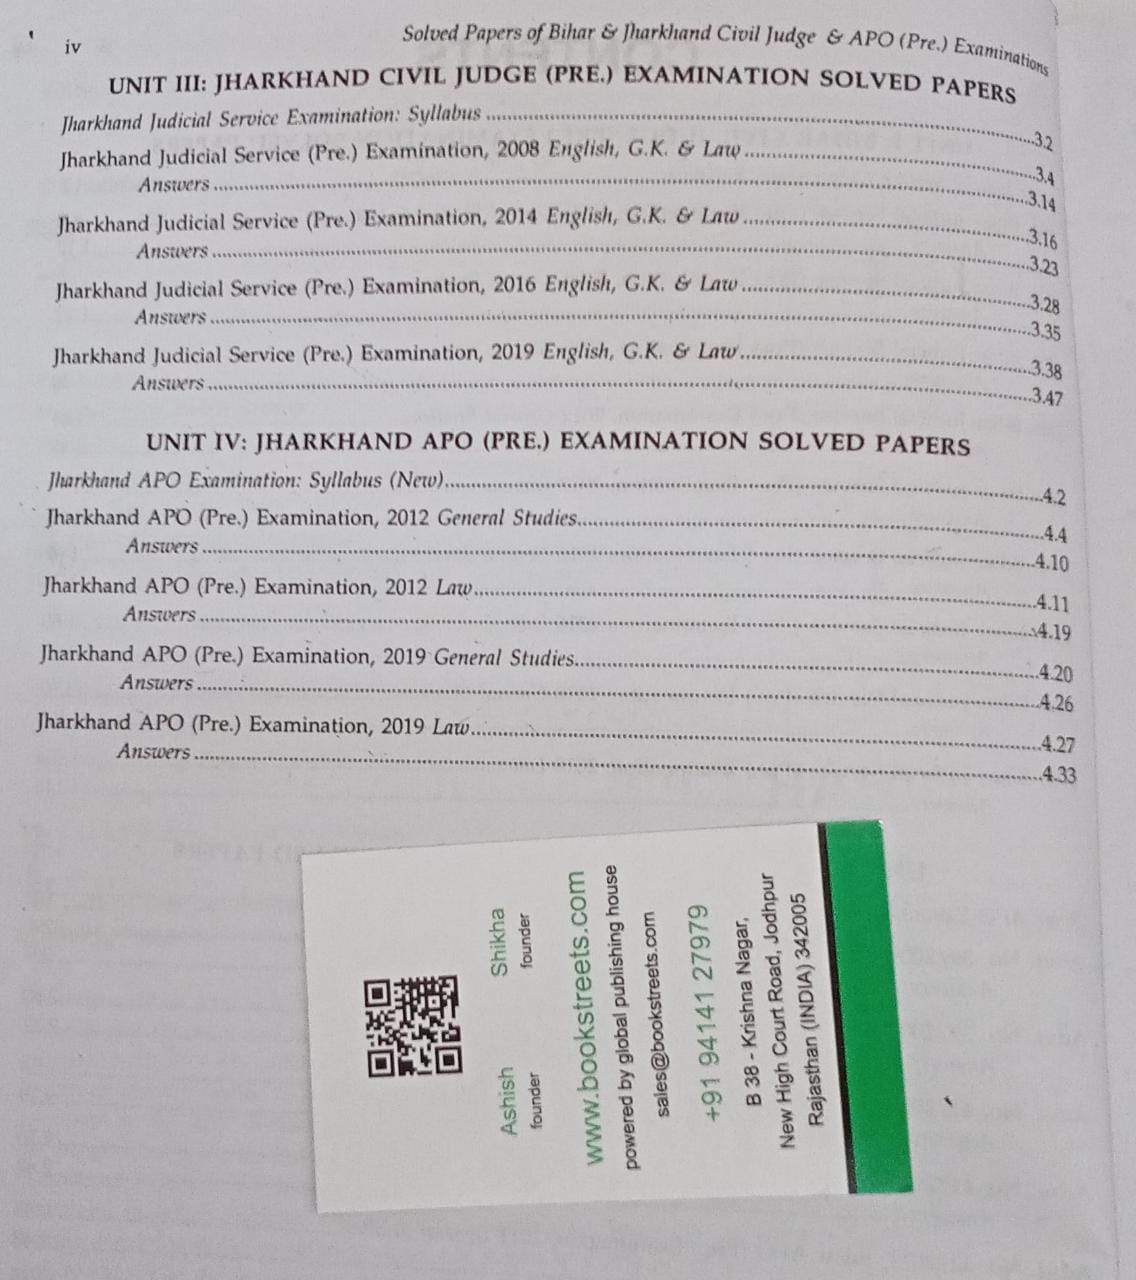 Singh's Solved Paper of Bihar and Jharkhand Civil Judge & APO by Singhal Law Publication